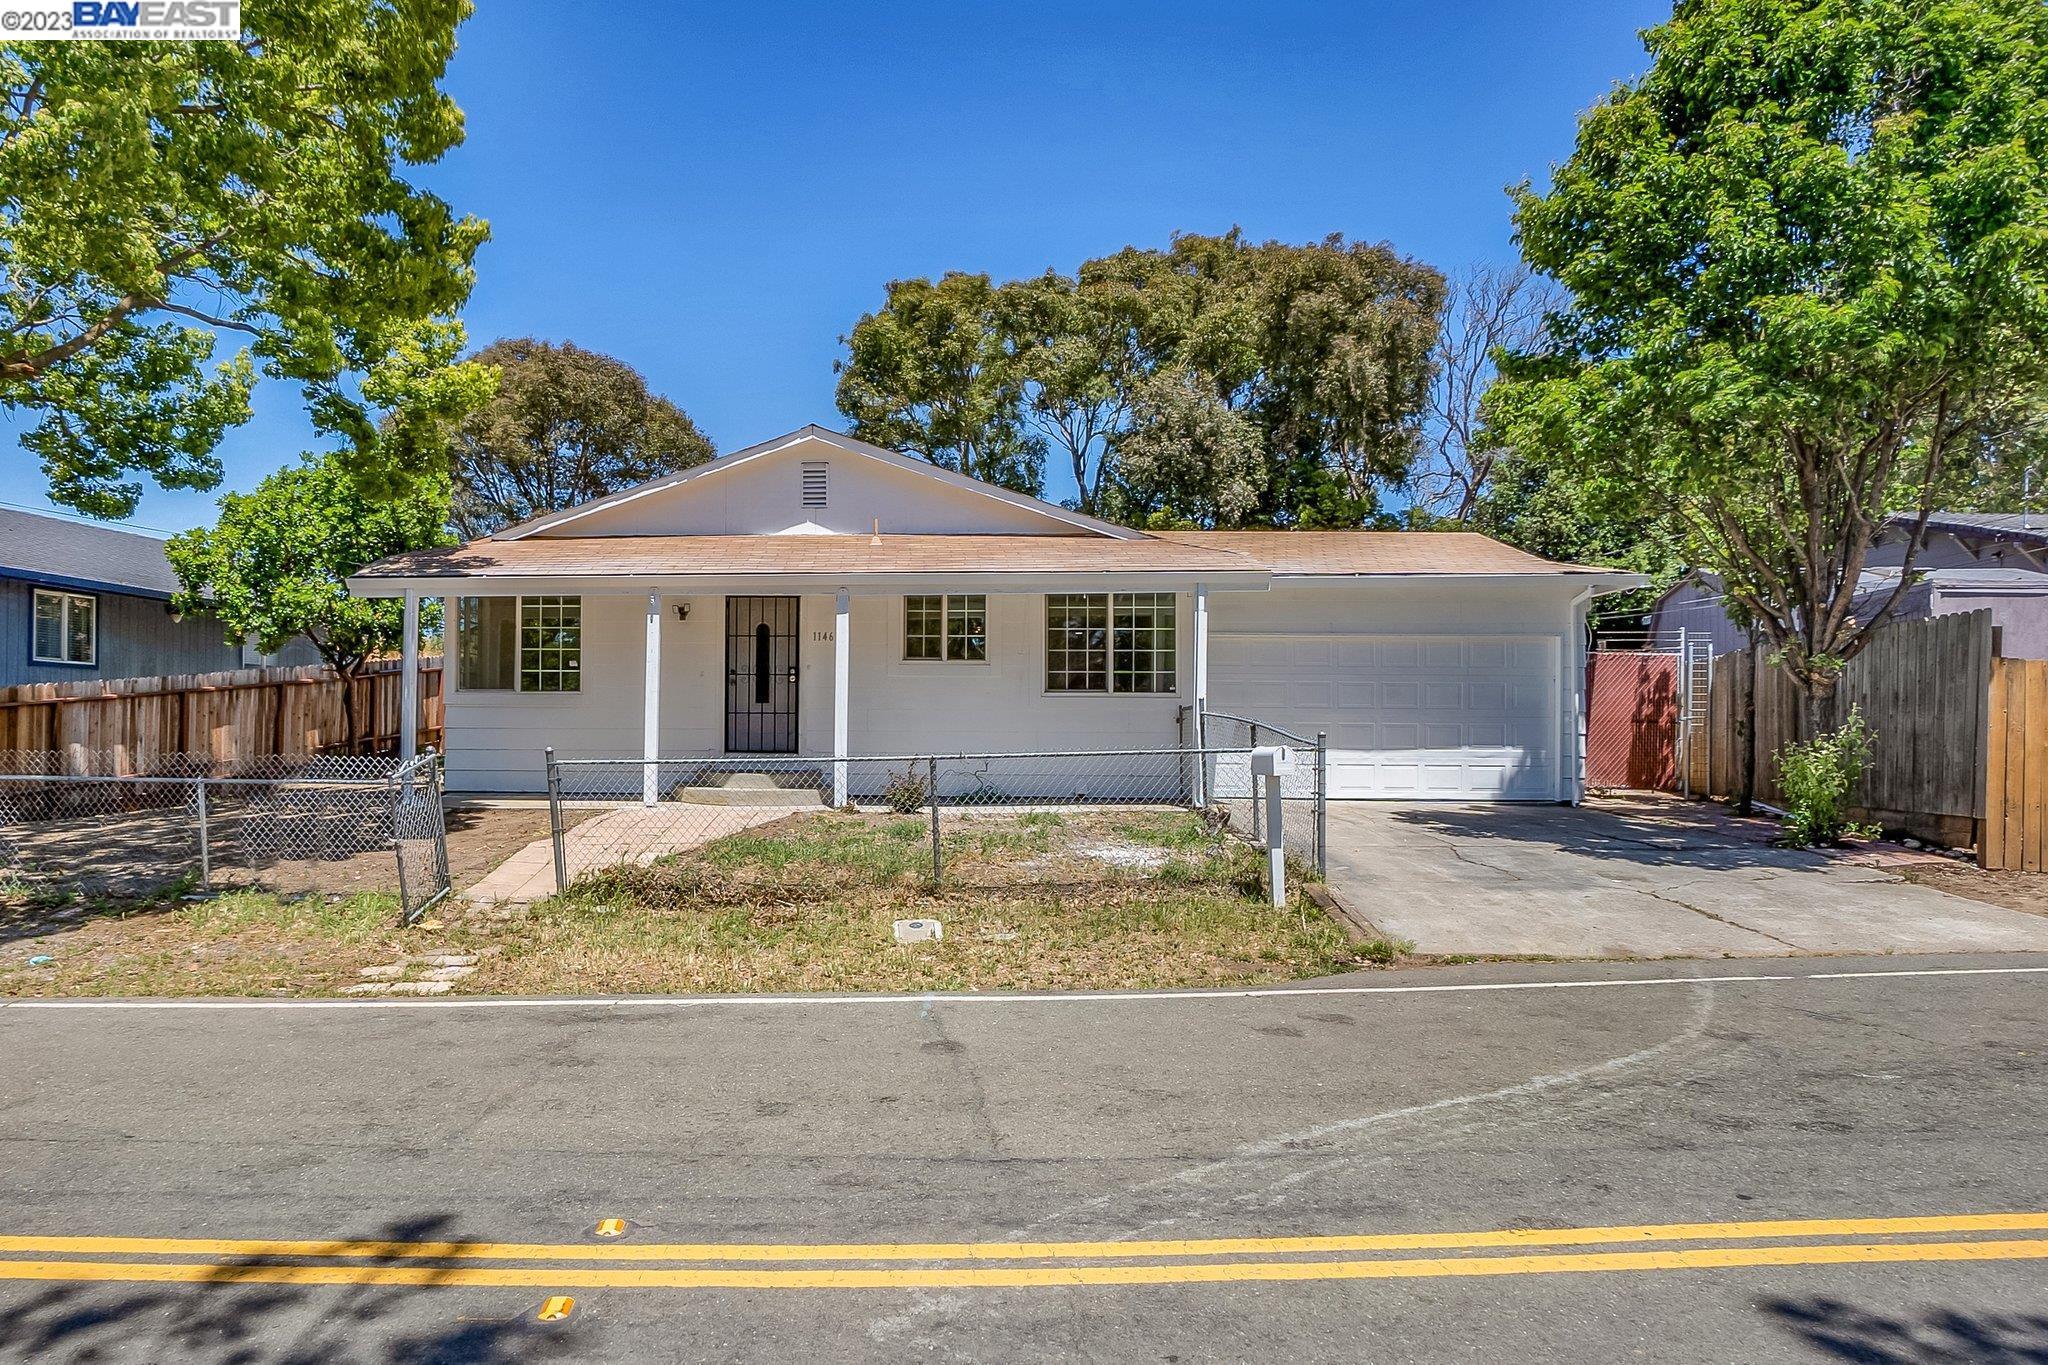 Newly remodeled 3 Bed, 2 Bath with Living, Family, Dining -Kitchen Combo & enclosure. The family room has space for an extra bathroom in case buyers want & access to the backyard. Home ready to move in Glen Cove Pkwy Neighborhood, near Shopping, Schools, Easy Freeways access to Vallejo, Concord, and Hercules cities within a few miles.